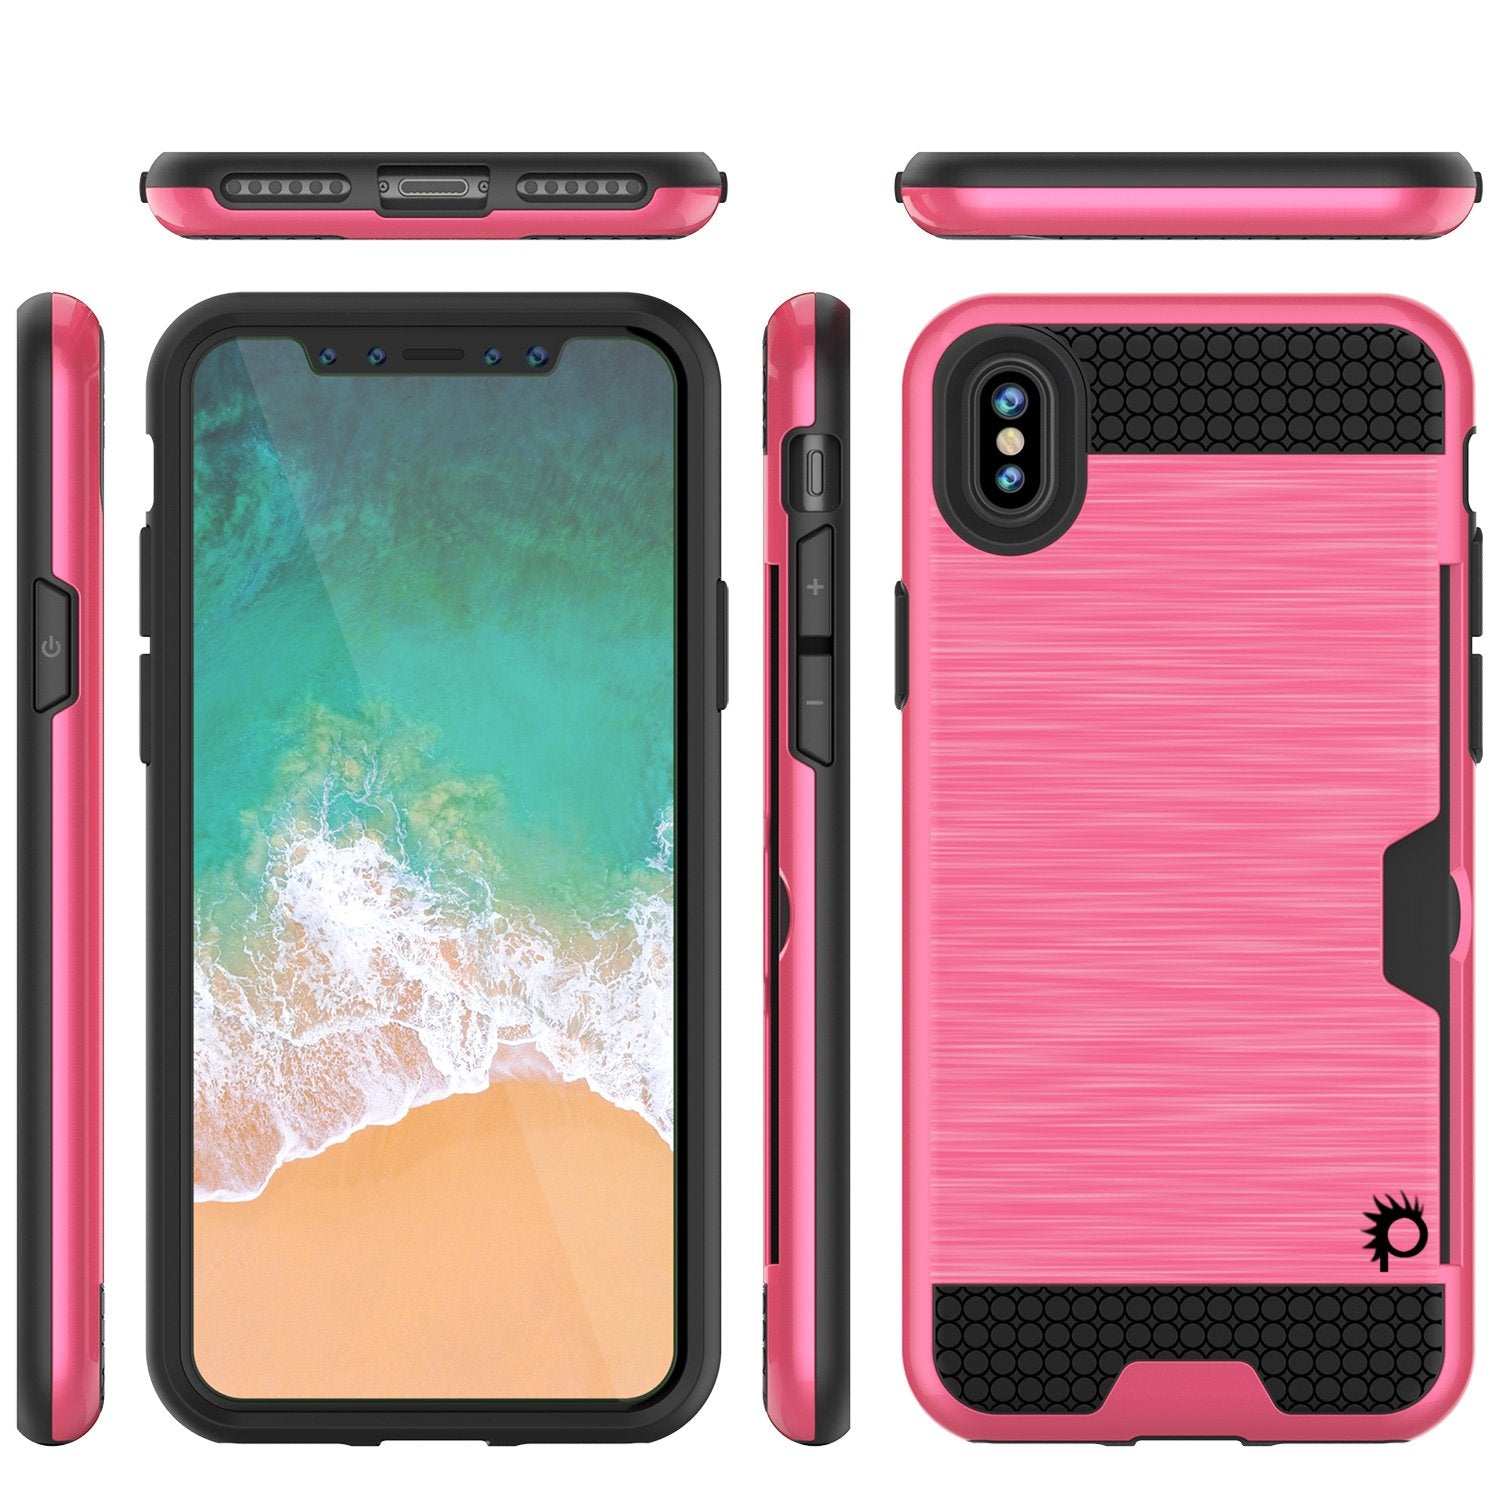 iPhone X Case, PUNKcase [SLOT Series] Slim Fit Dual-Layer Armor Cover & Tempered Glass PUNKSHIELD Screen Protector for Apple iPhone X [Pink]